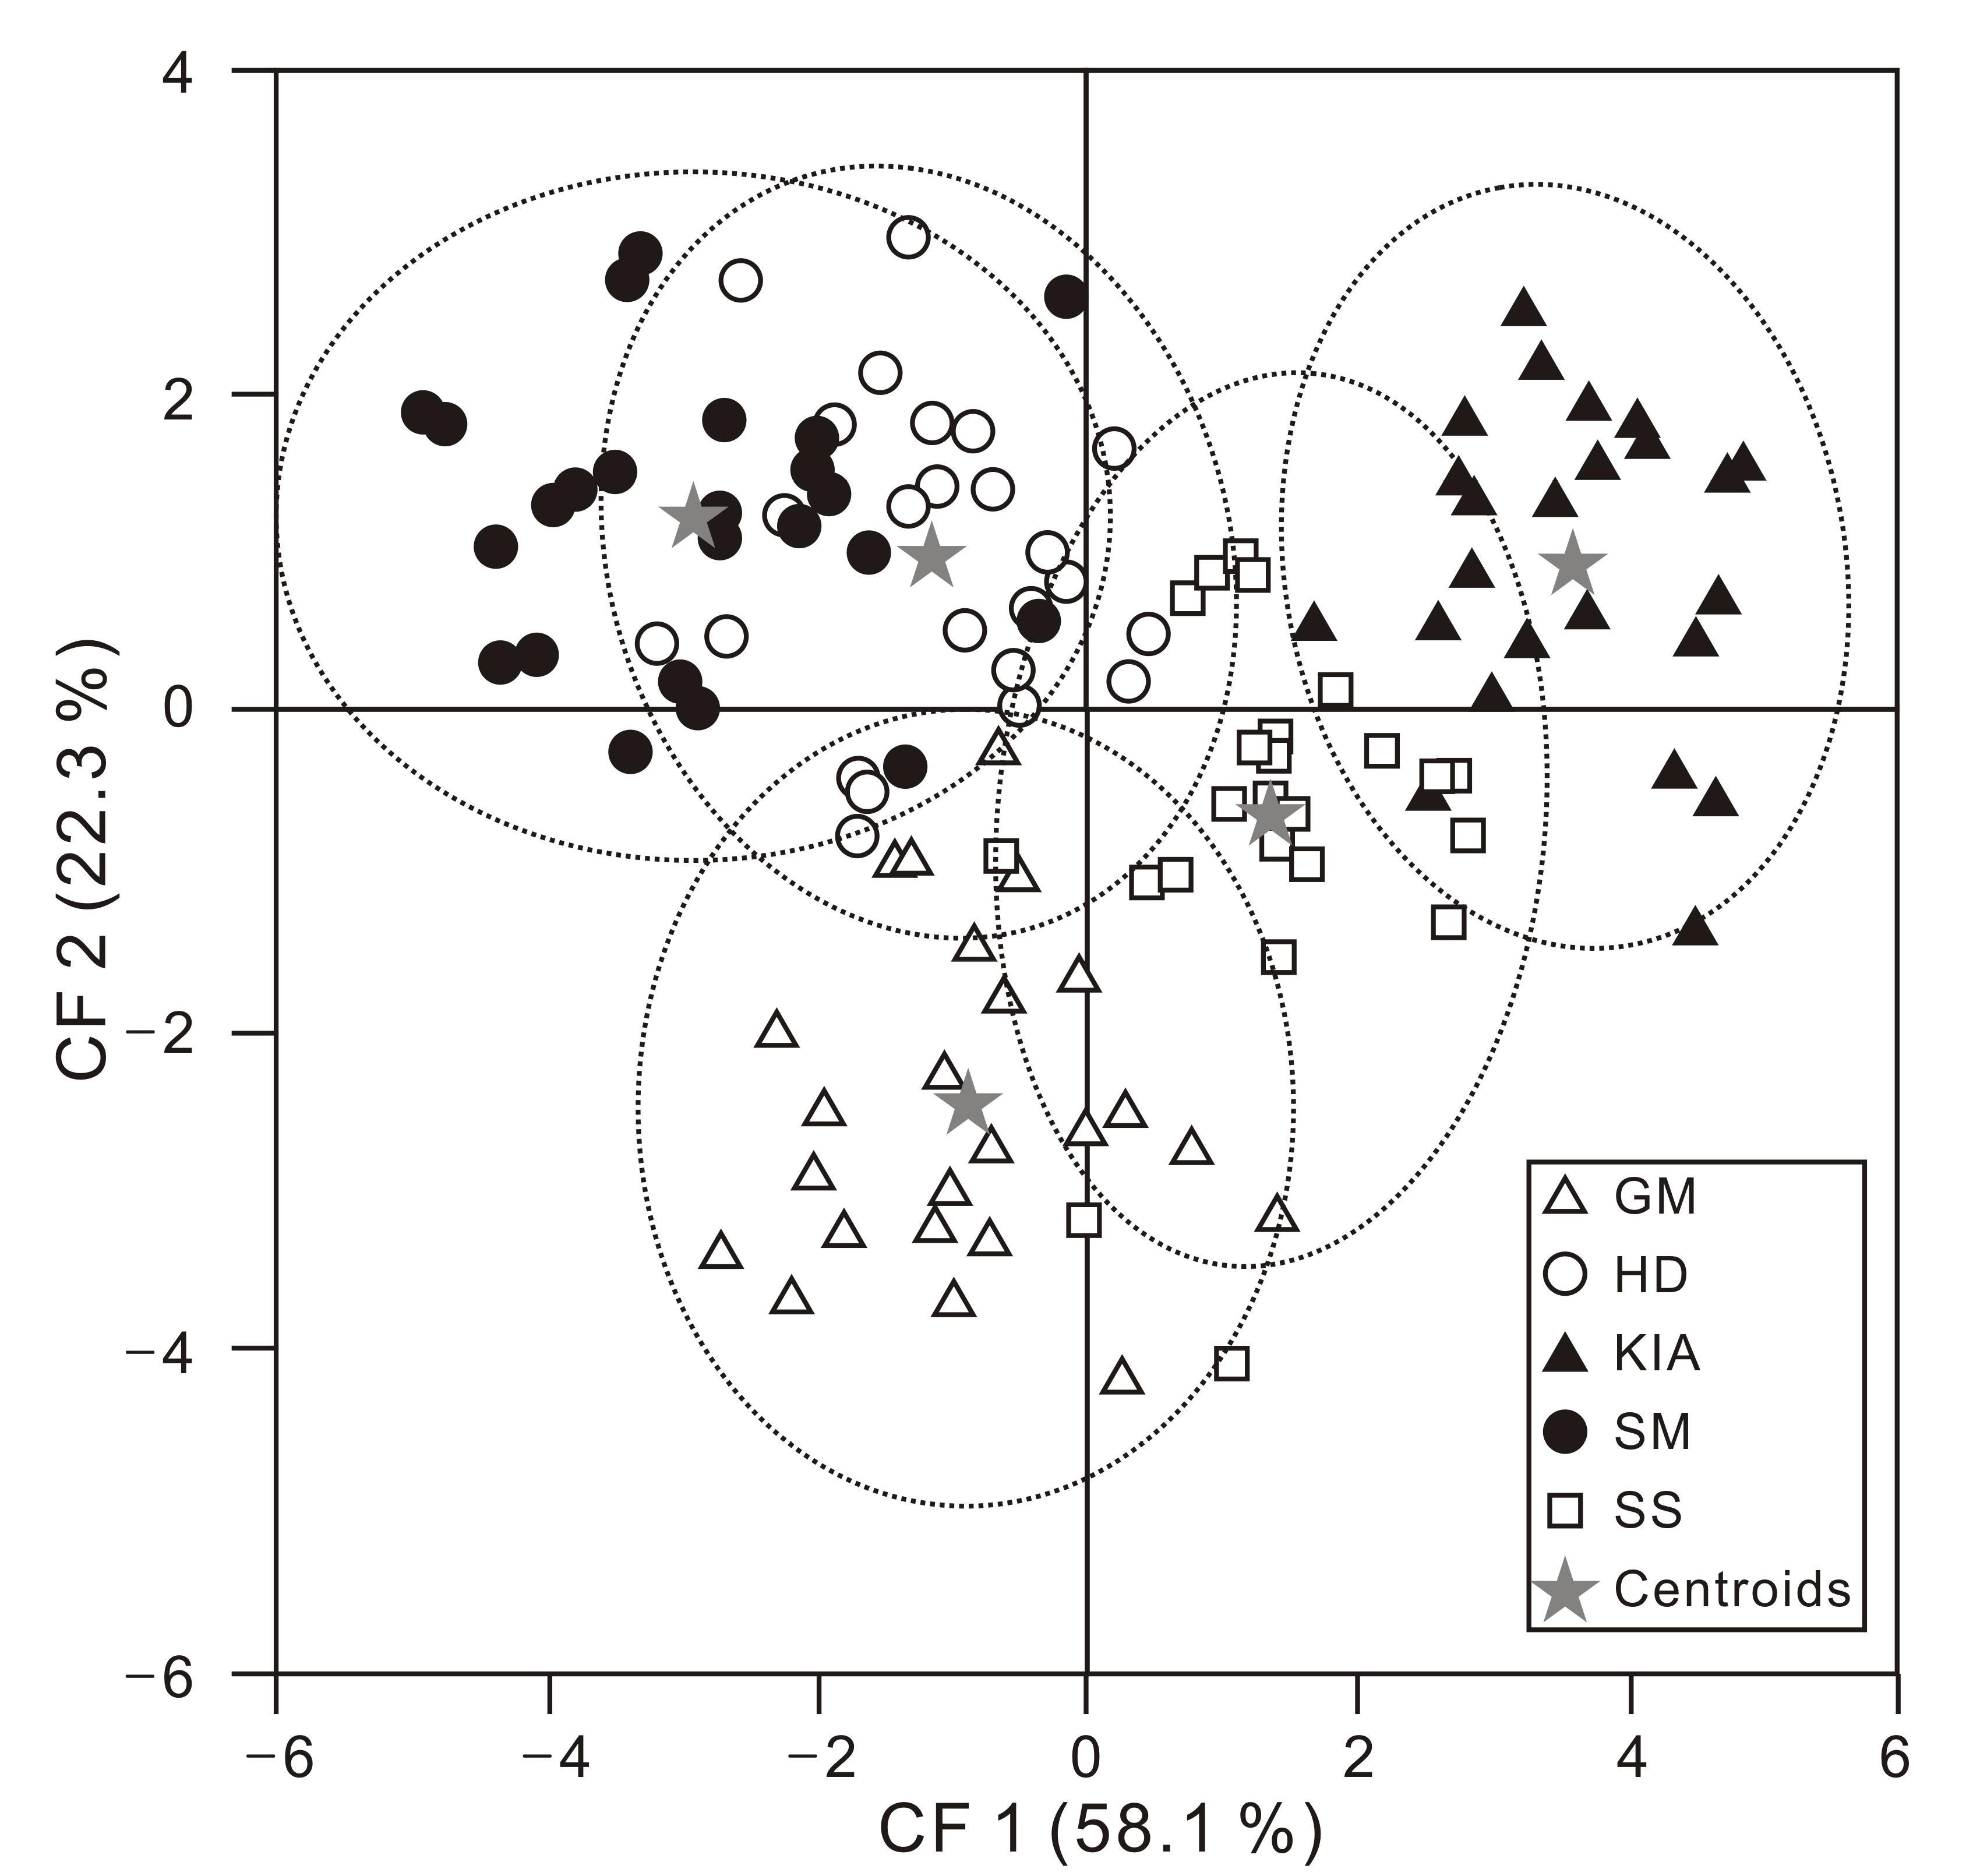 Plots of correlating factor 1 vs. 2 of the LDA method indicating clear separation of GM, KIA, SM and SS